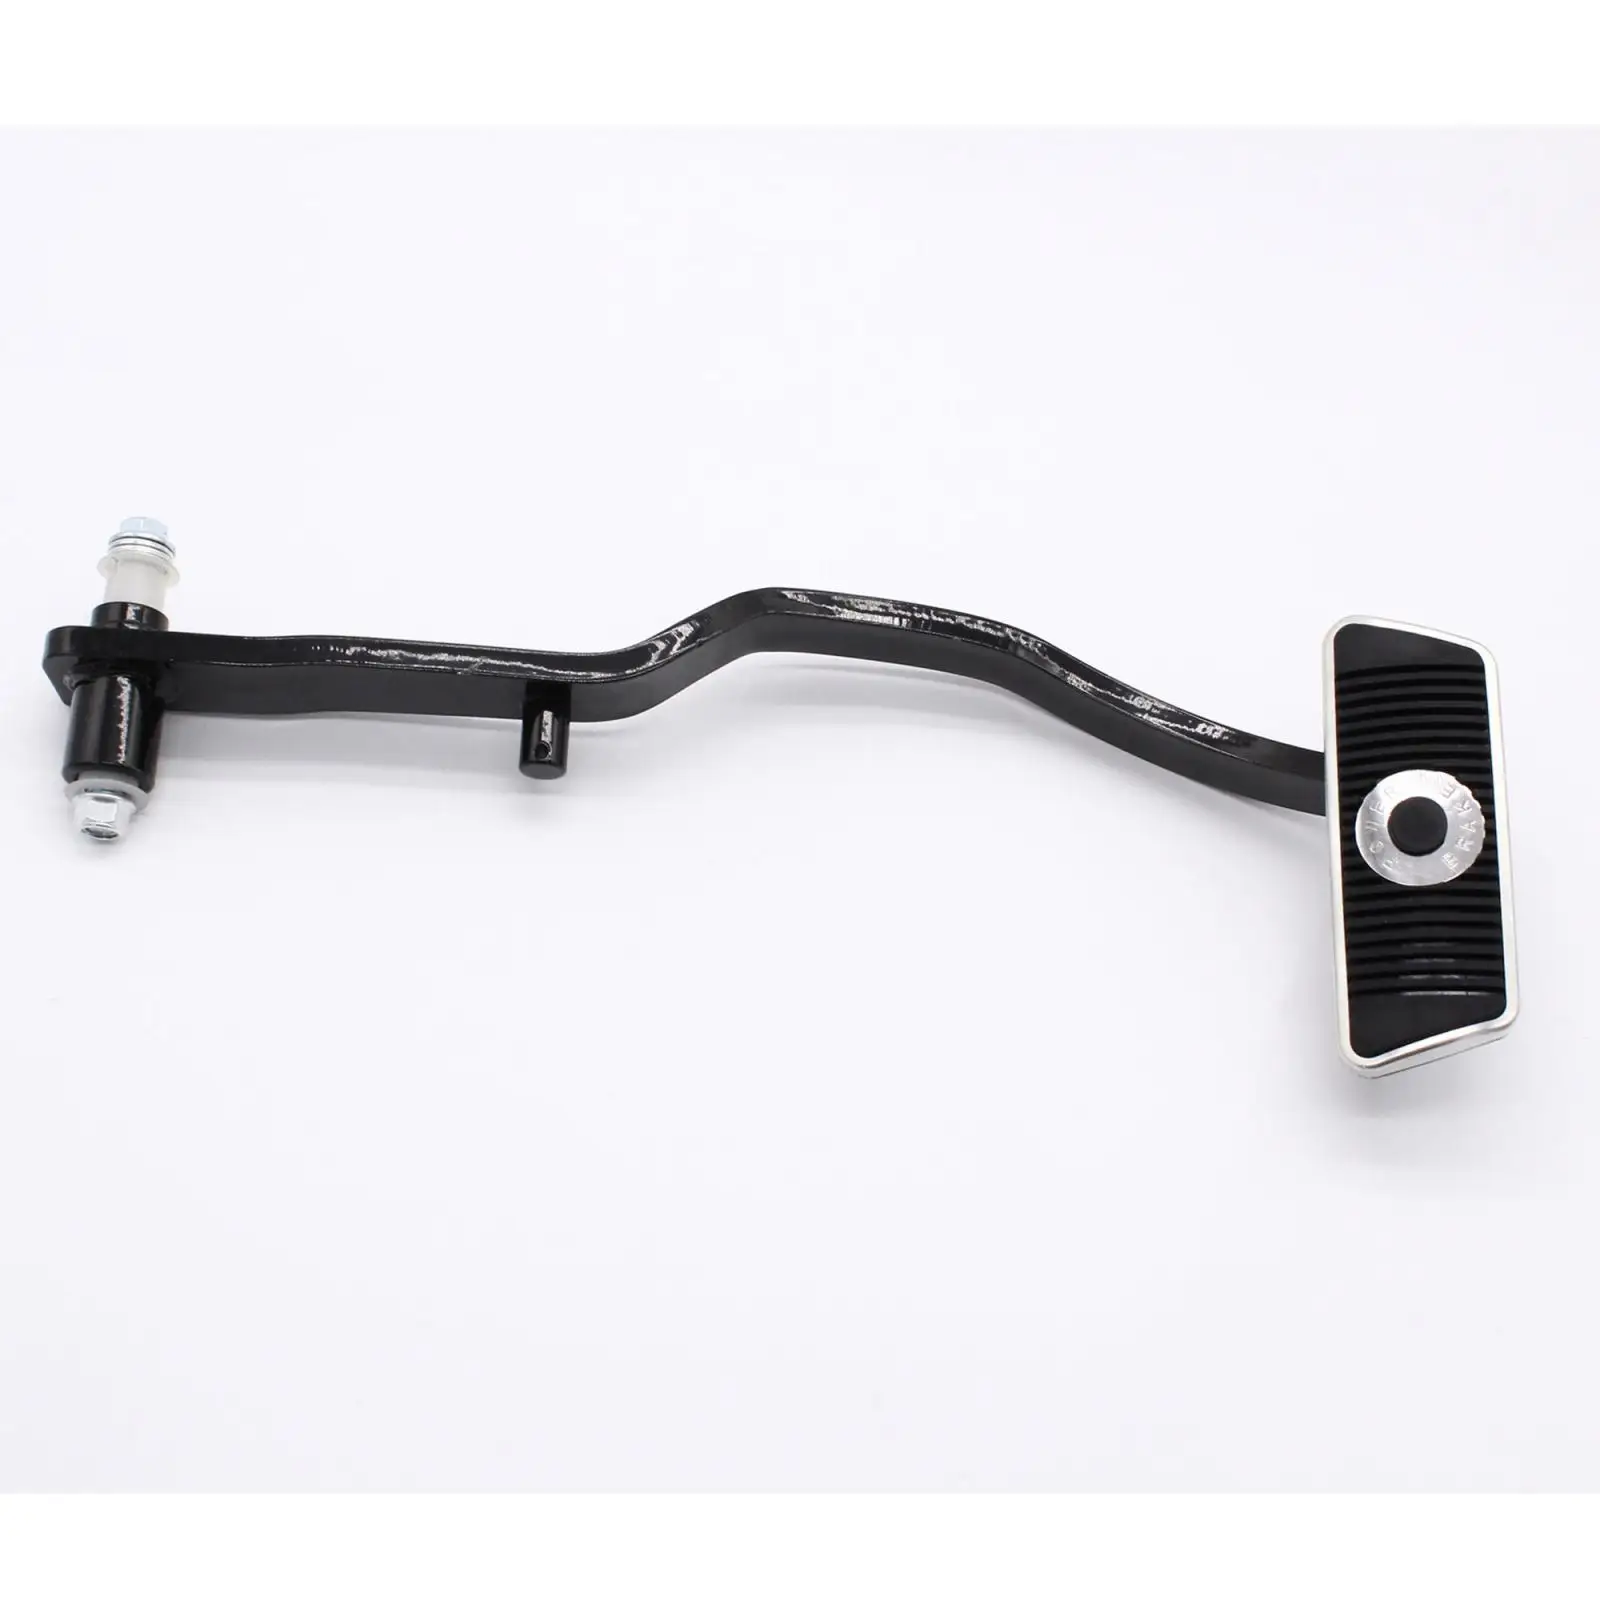 Brake Pedal Arm with Automatic Transmission B10520 for Ford Mustang Accessories